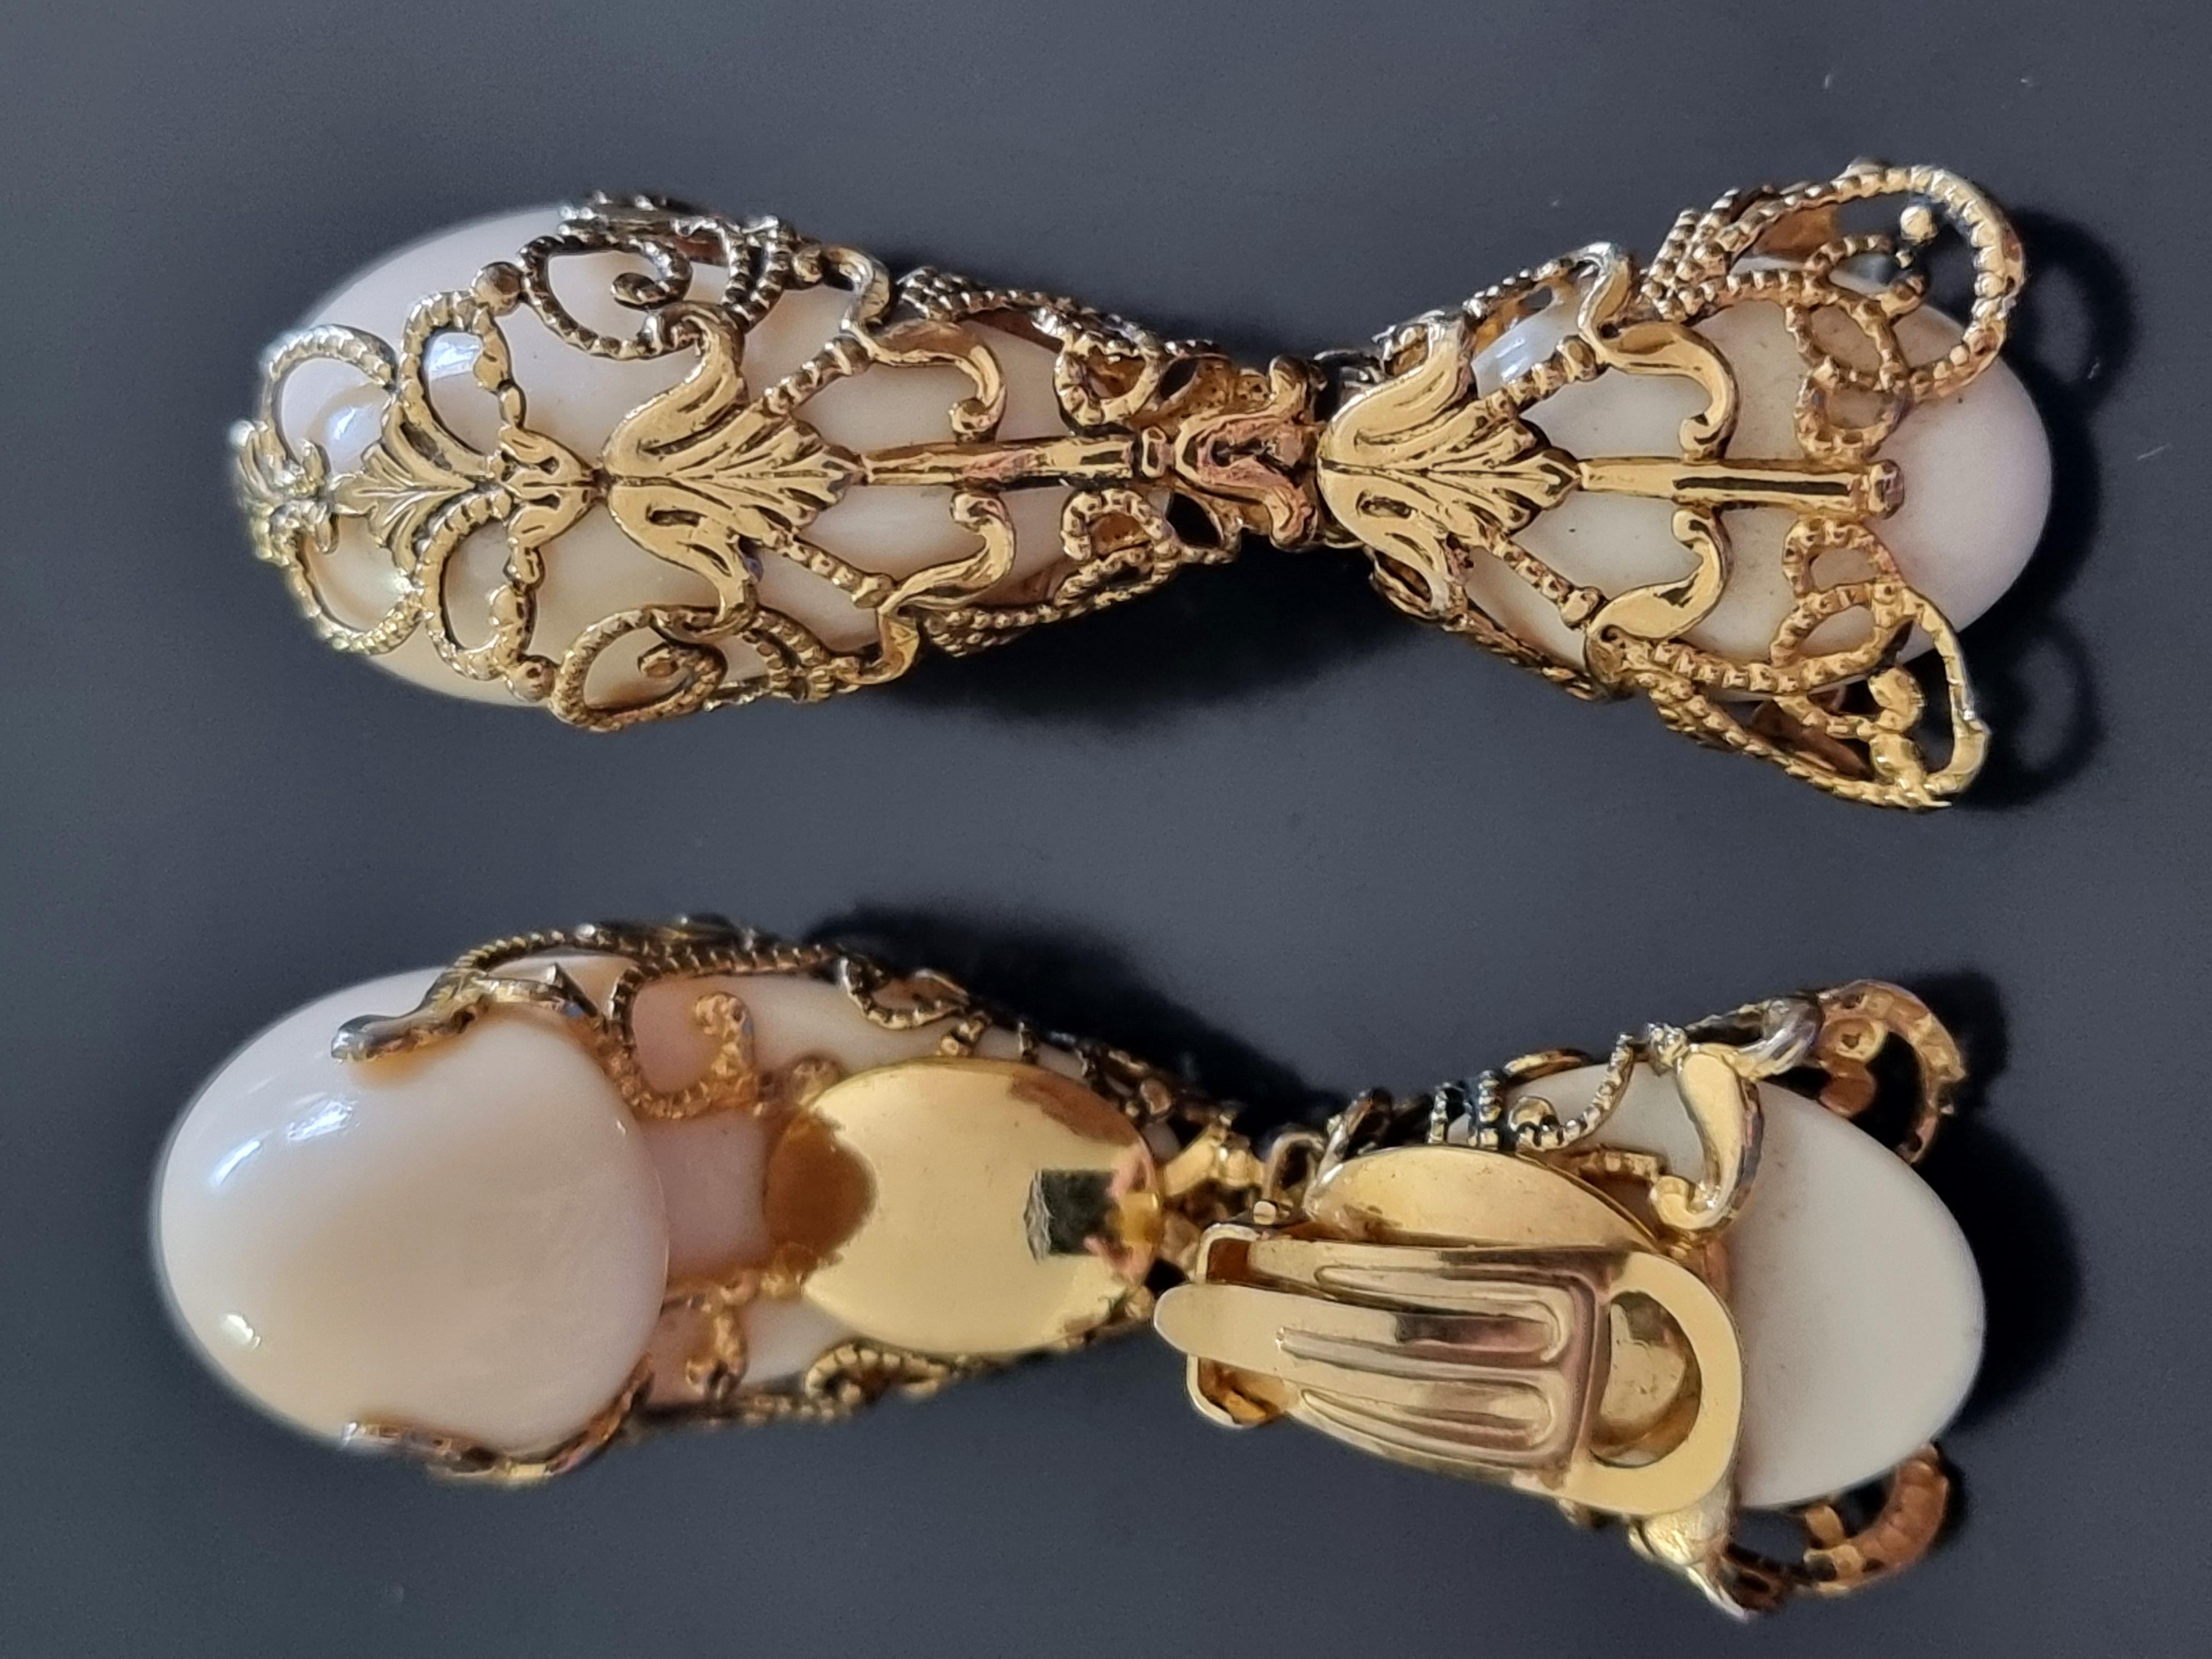 Oversize, podium, large clip-on Earrings,
80s vintage,
by high-end French designer Isabel Canovas,
very good quality,
dimension 8 x 2.5 cm, weight 1 x 24 g,
good condition.

Isabel CANOVAS was born in 1945 in Paris.
Isabel was exposed to Haute